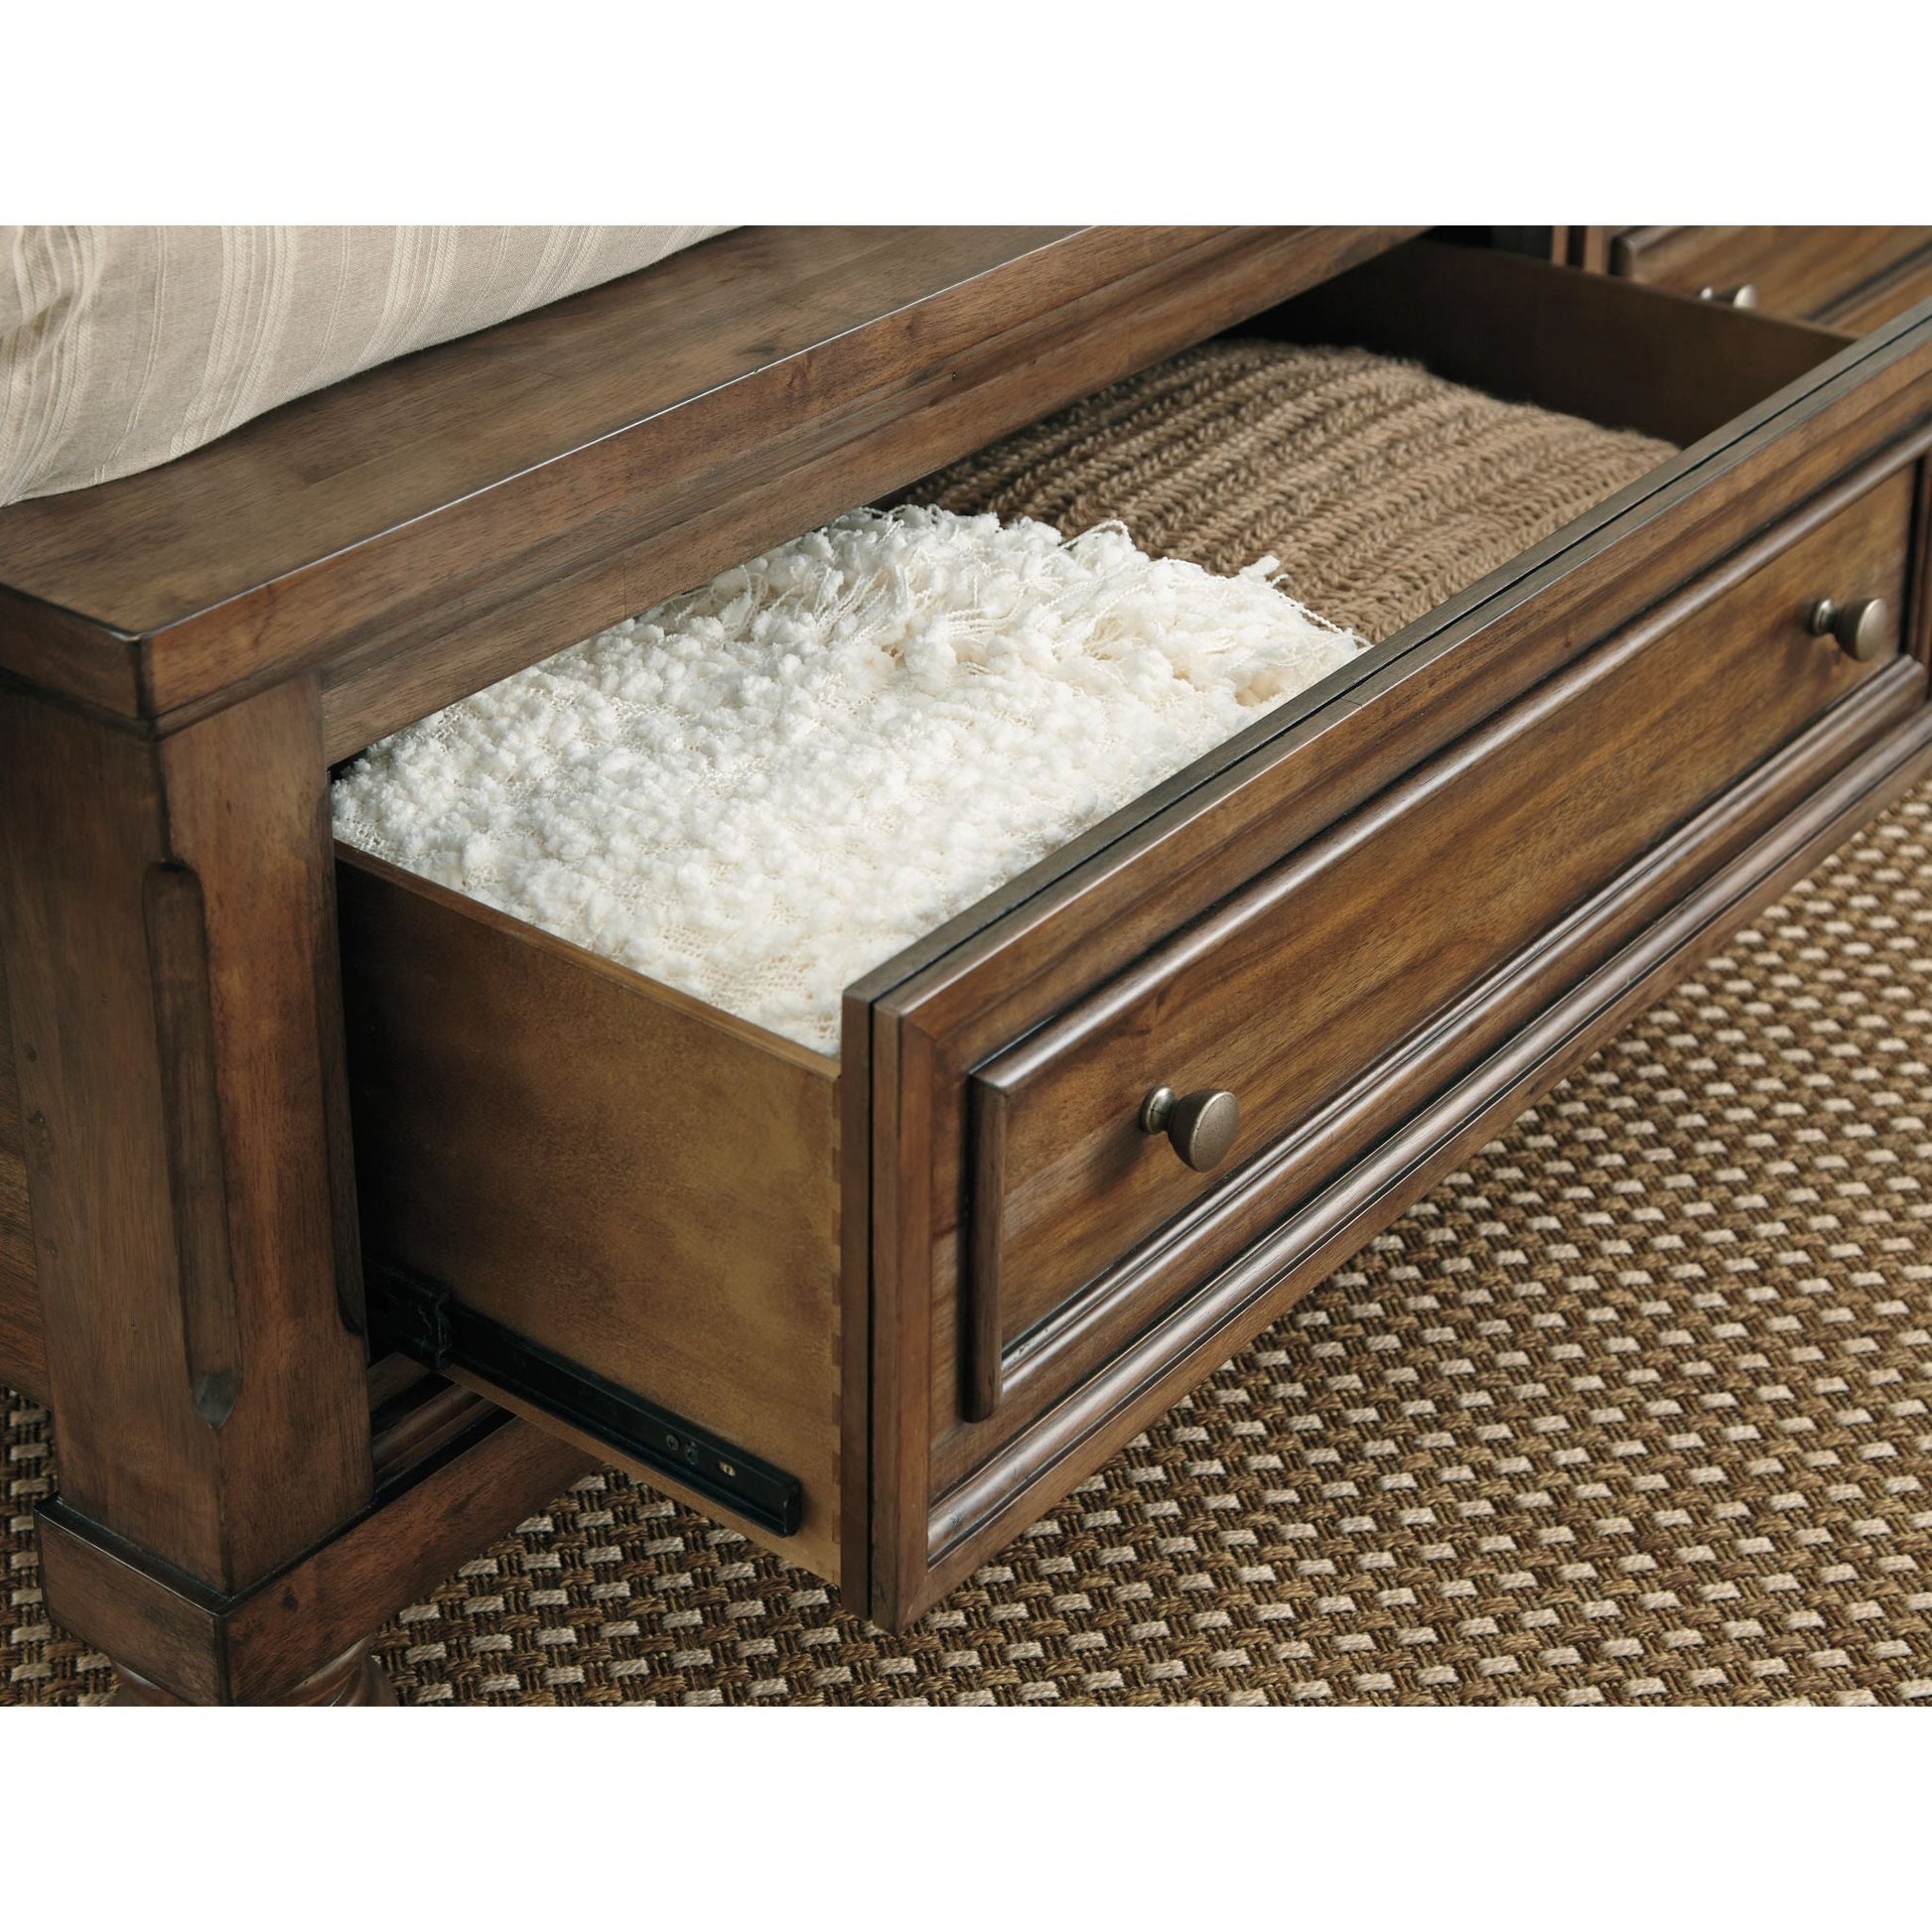 Baymore Panel Bed with Storage